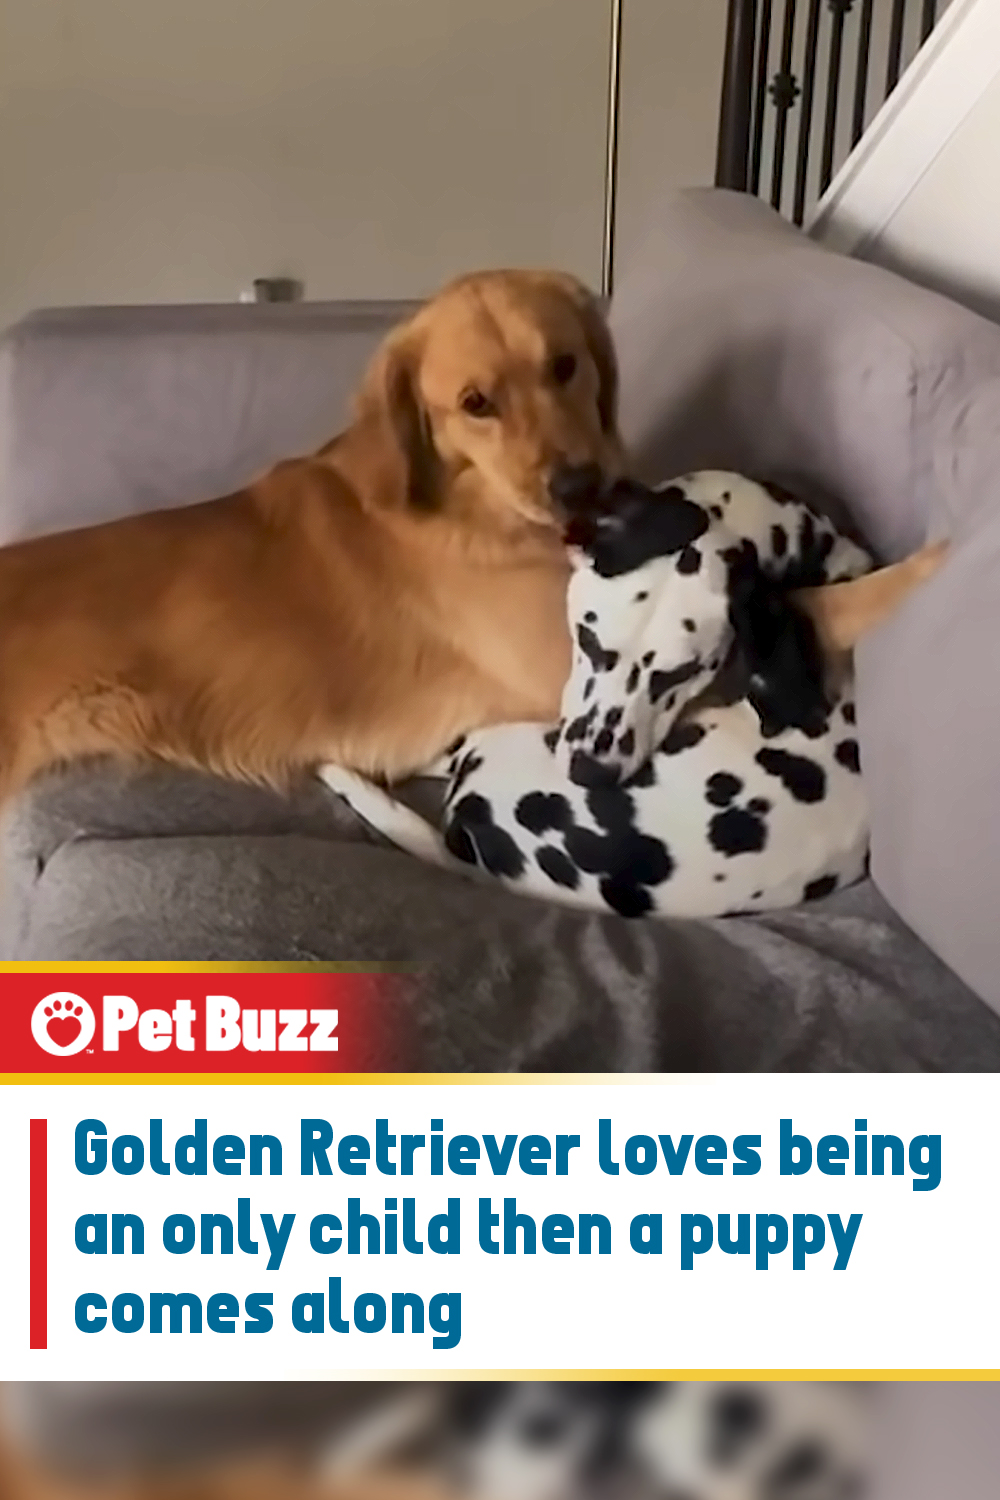 Golden Retriever loves being an only child then a puppy comes along